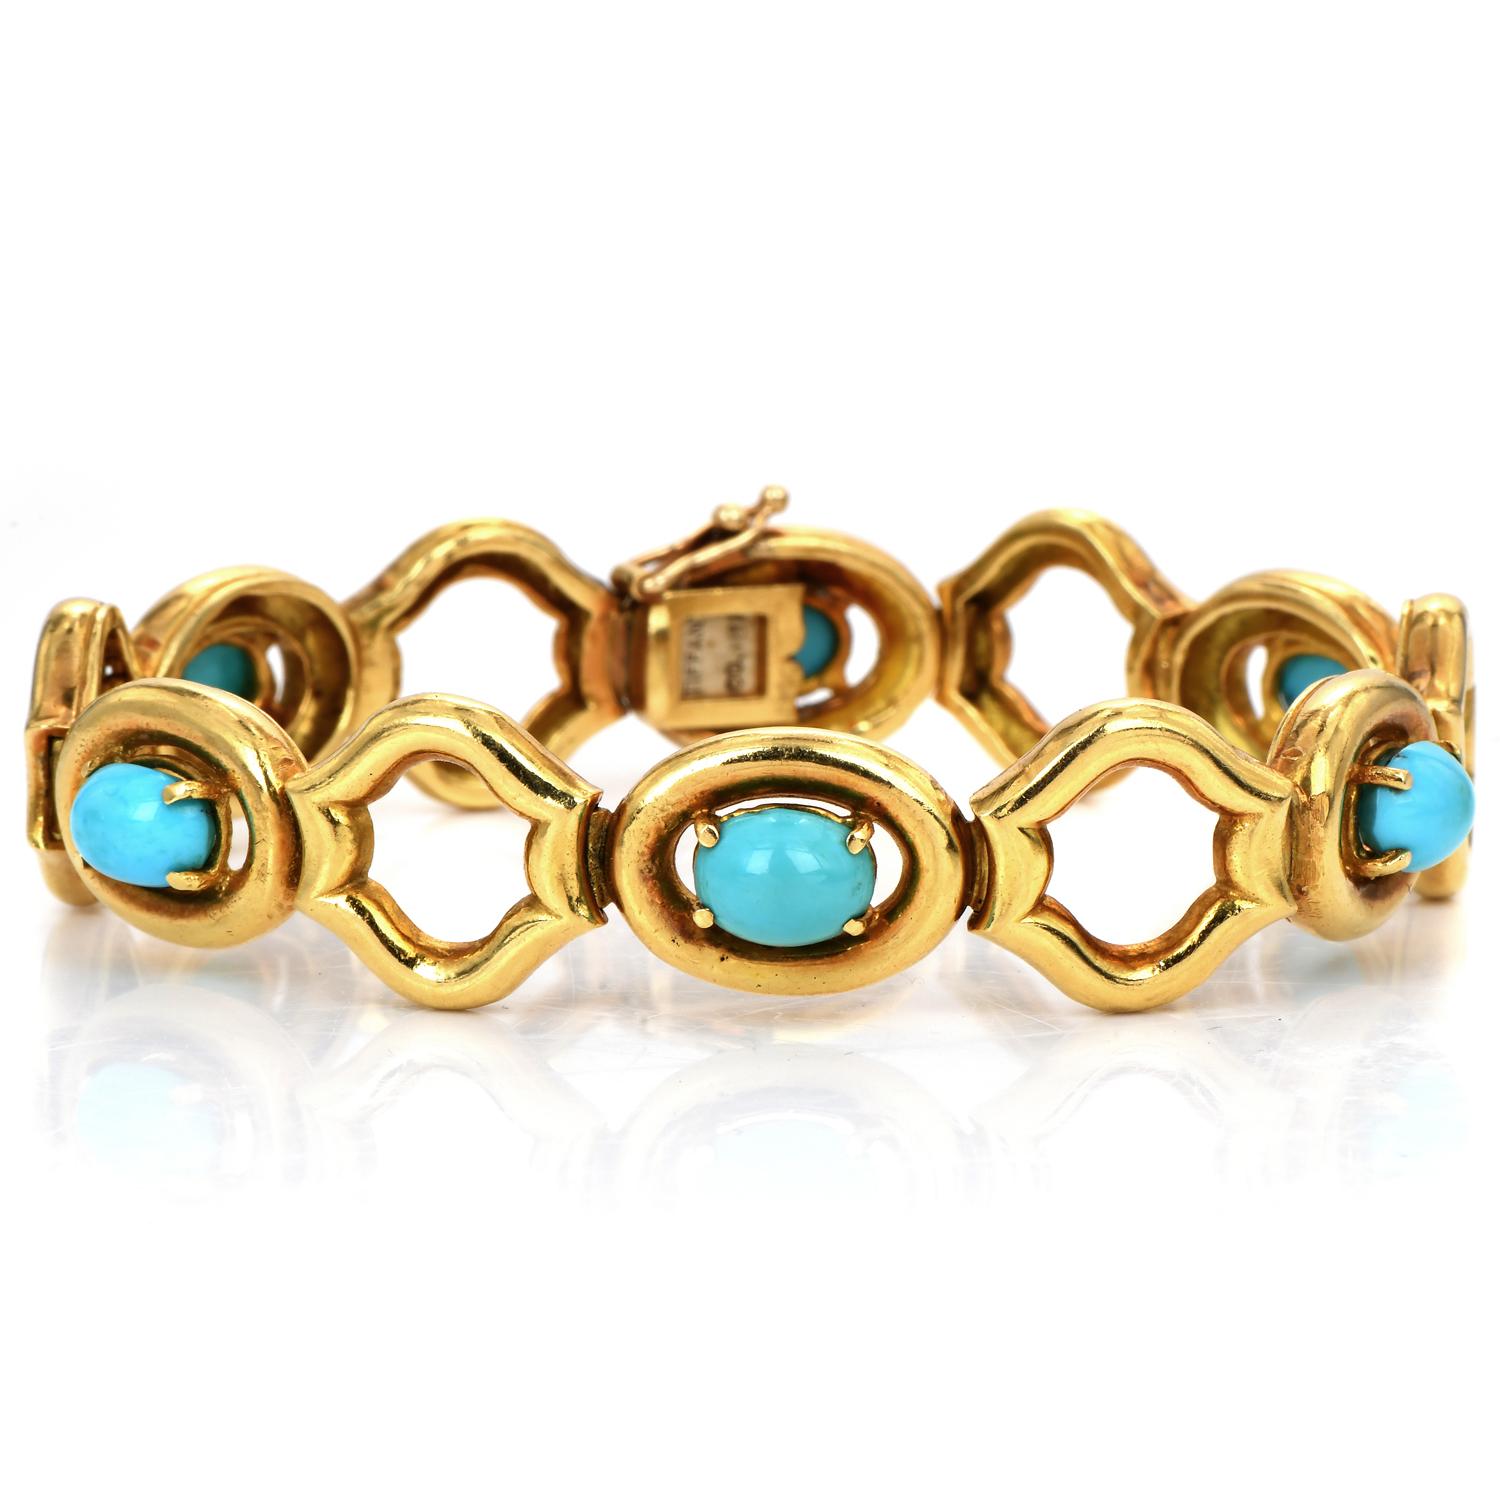 Elegant high-quality link bracelet, Made by Tiffany & Co.

Exquisite Open polished link design, this vintage the 1980s piece is crafted in solid 18K yellow gold.

Centered by 6 cabochons oval cut genuine fine natural untreated turquoise, prong set,